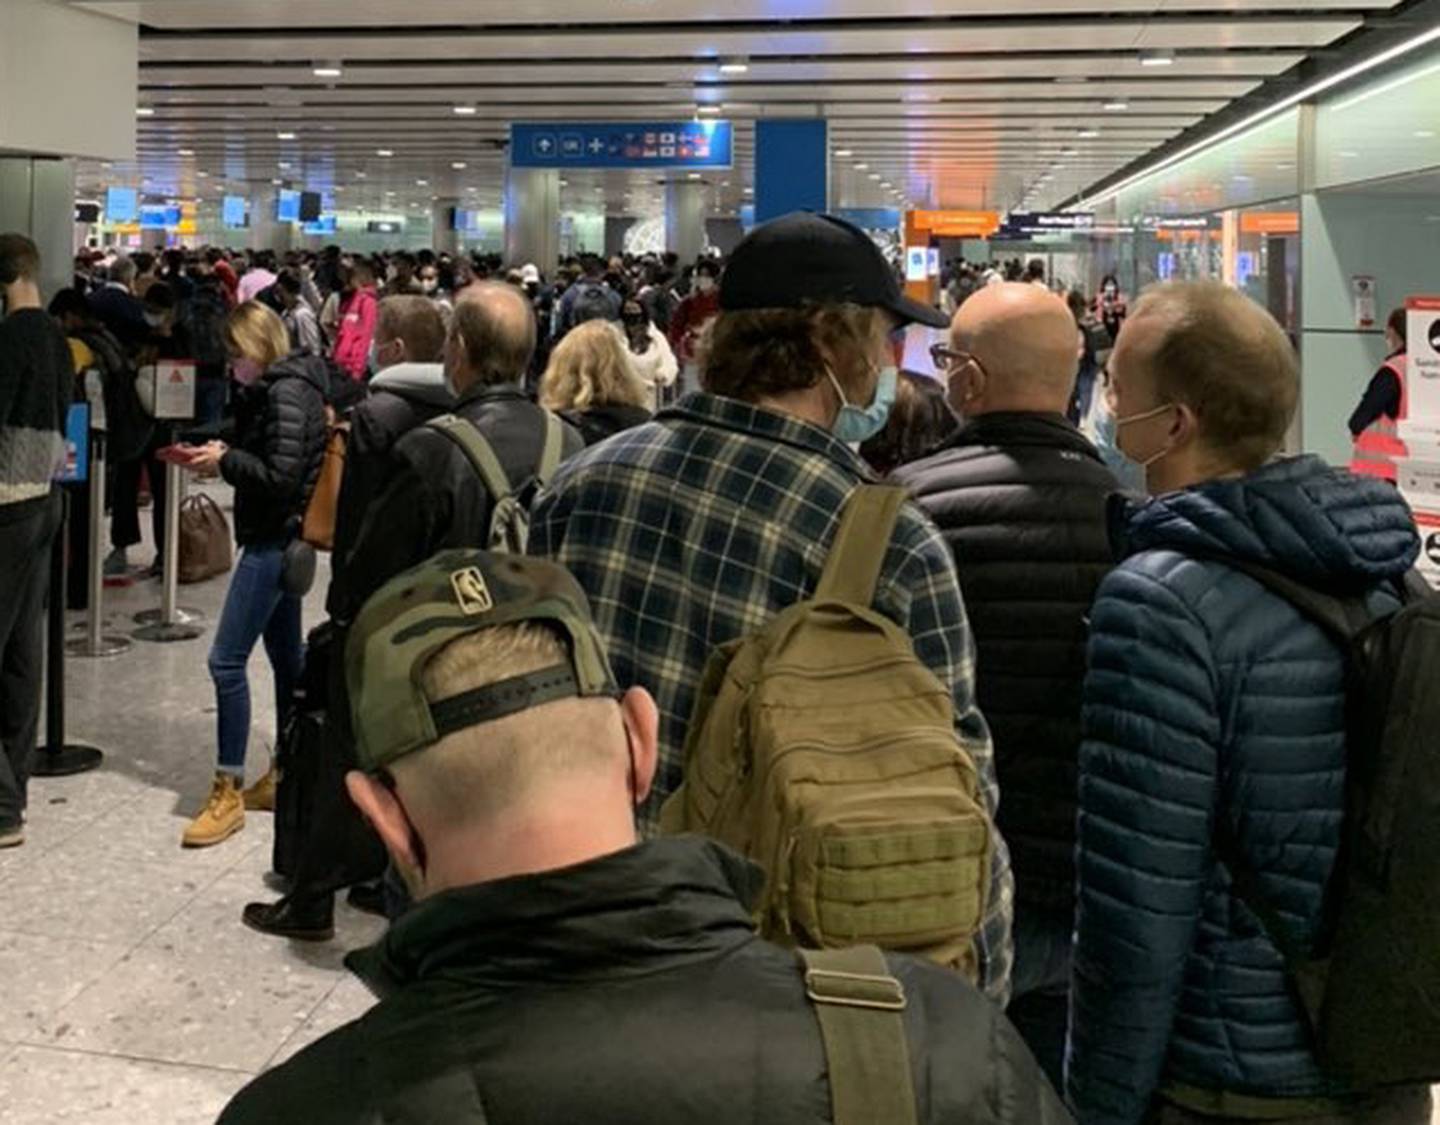 Passengers arriving at Heathrow this morning were forced to stand in line for hours after a failure of the e-gates: Christian Jones / Twitter